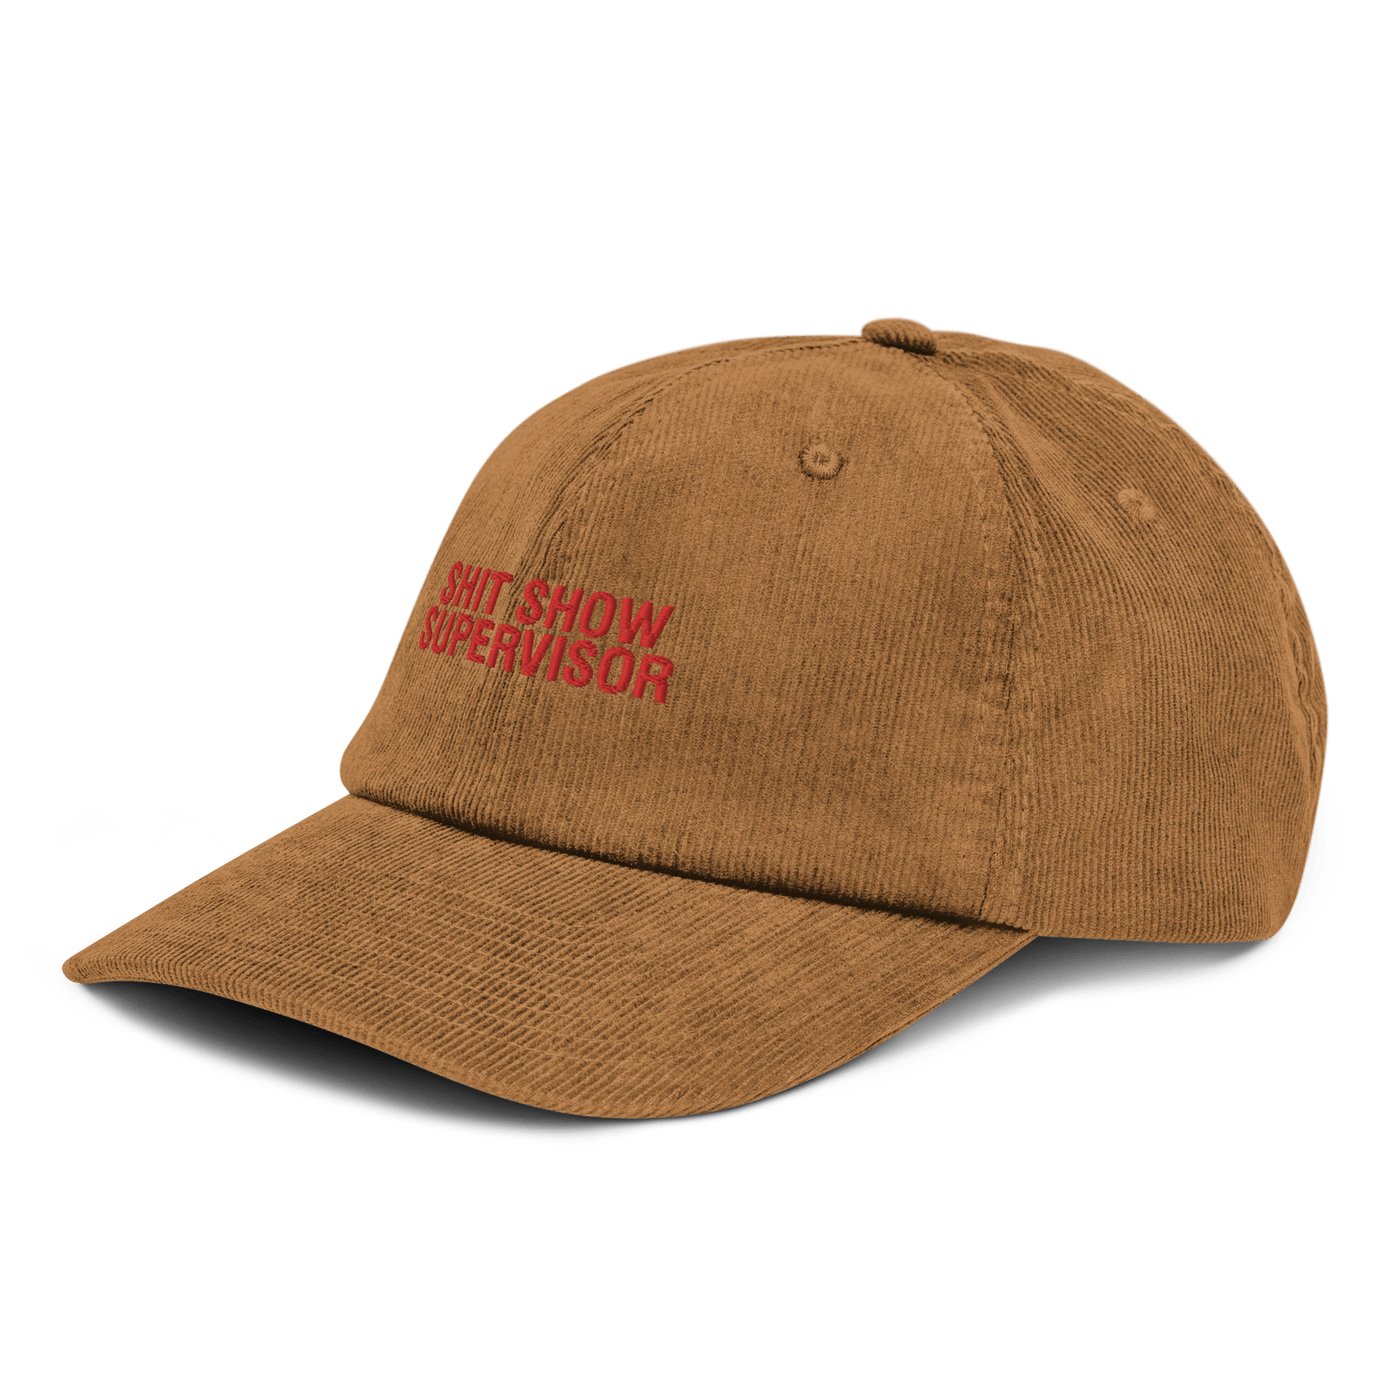 Shit Show Supervisor Corduroy hat - Camel - Just Another Cap Store